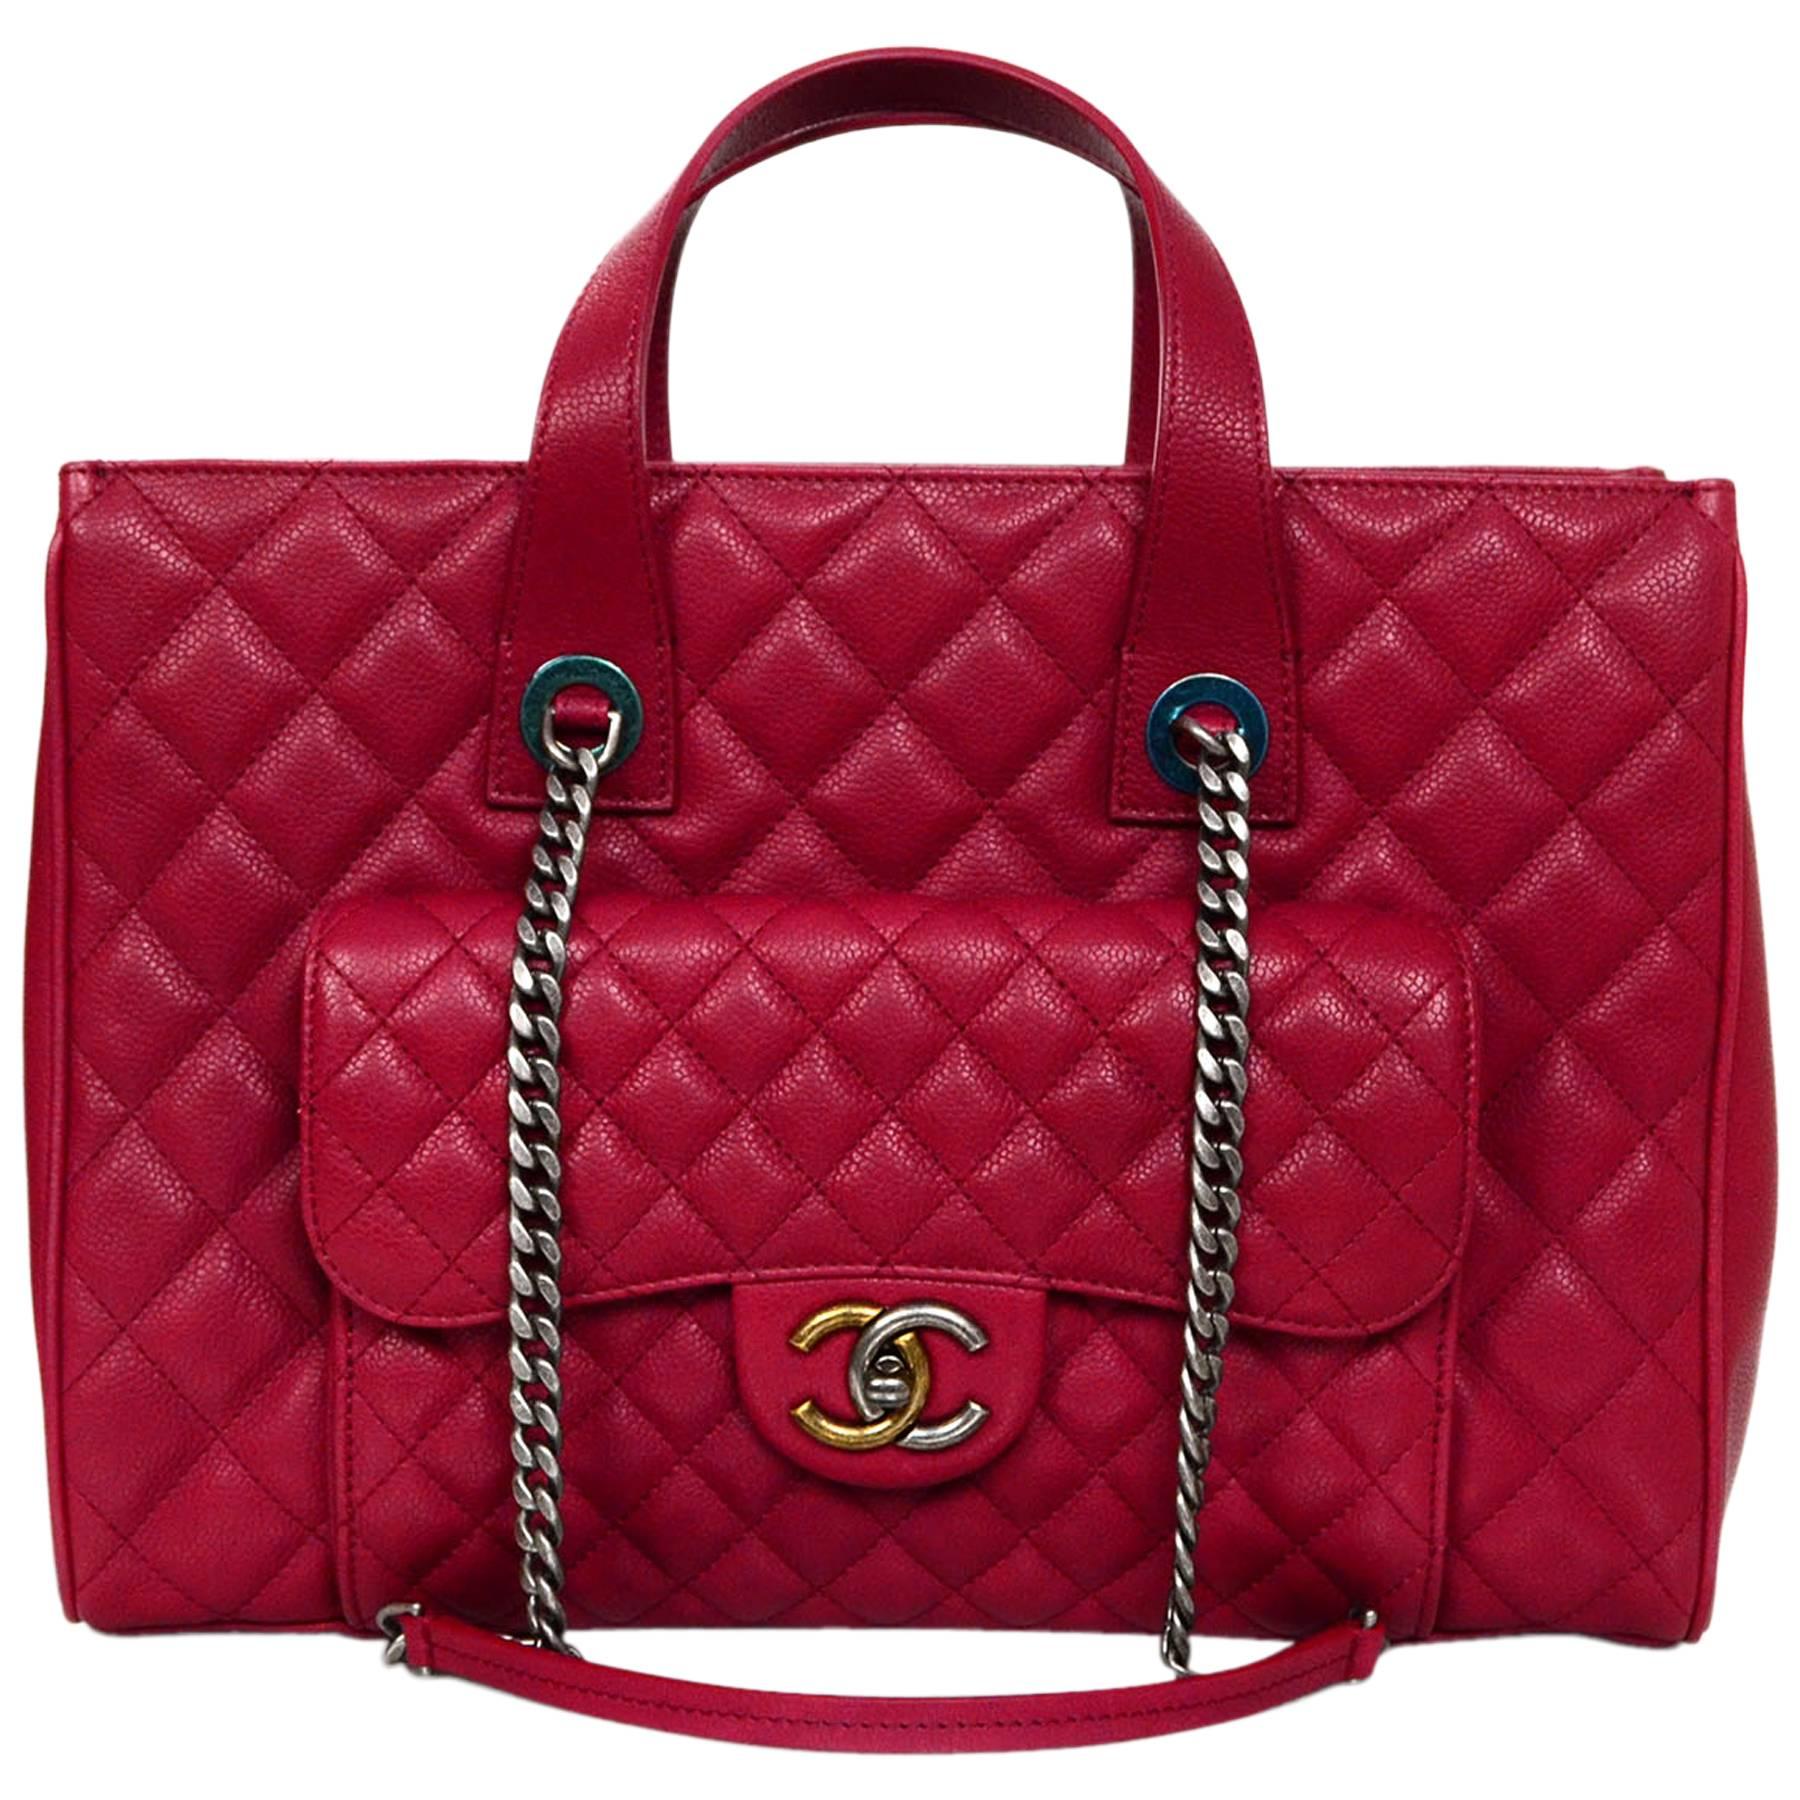 Chanel NEW 2016 Red Caviar Leather Tote Bag with Front Pocket